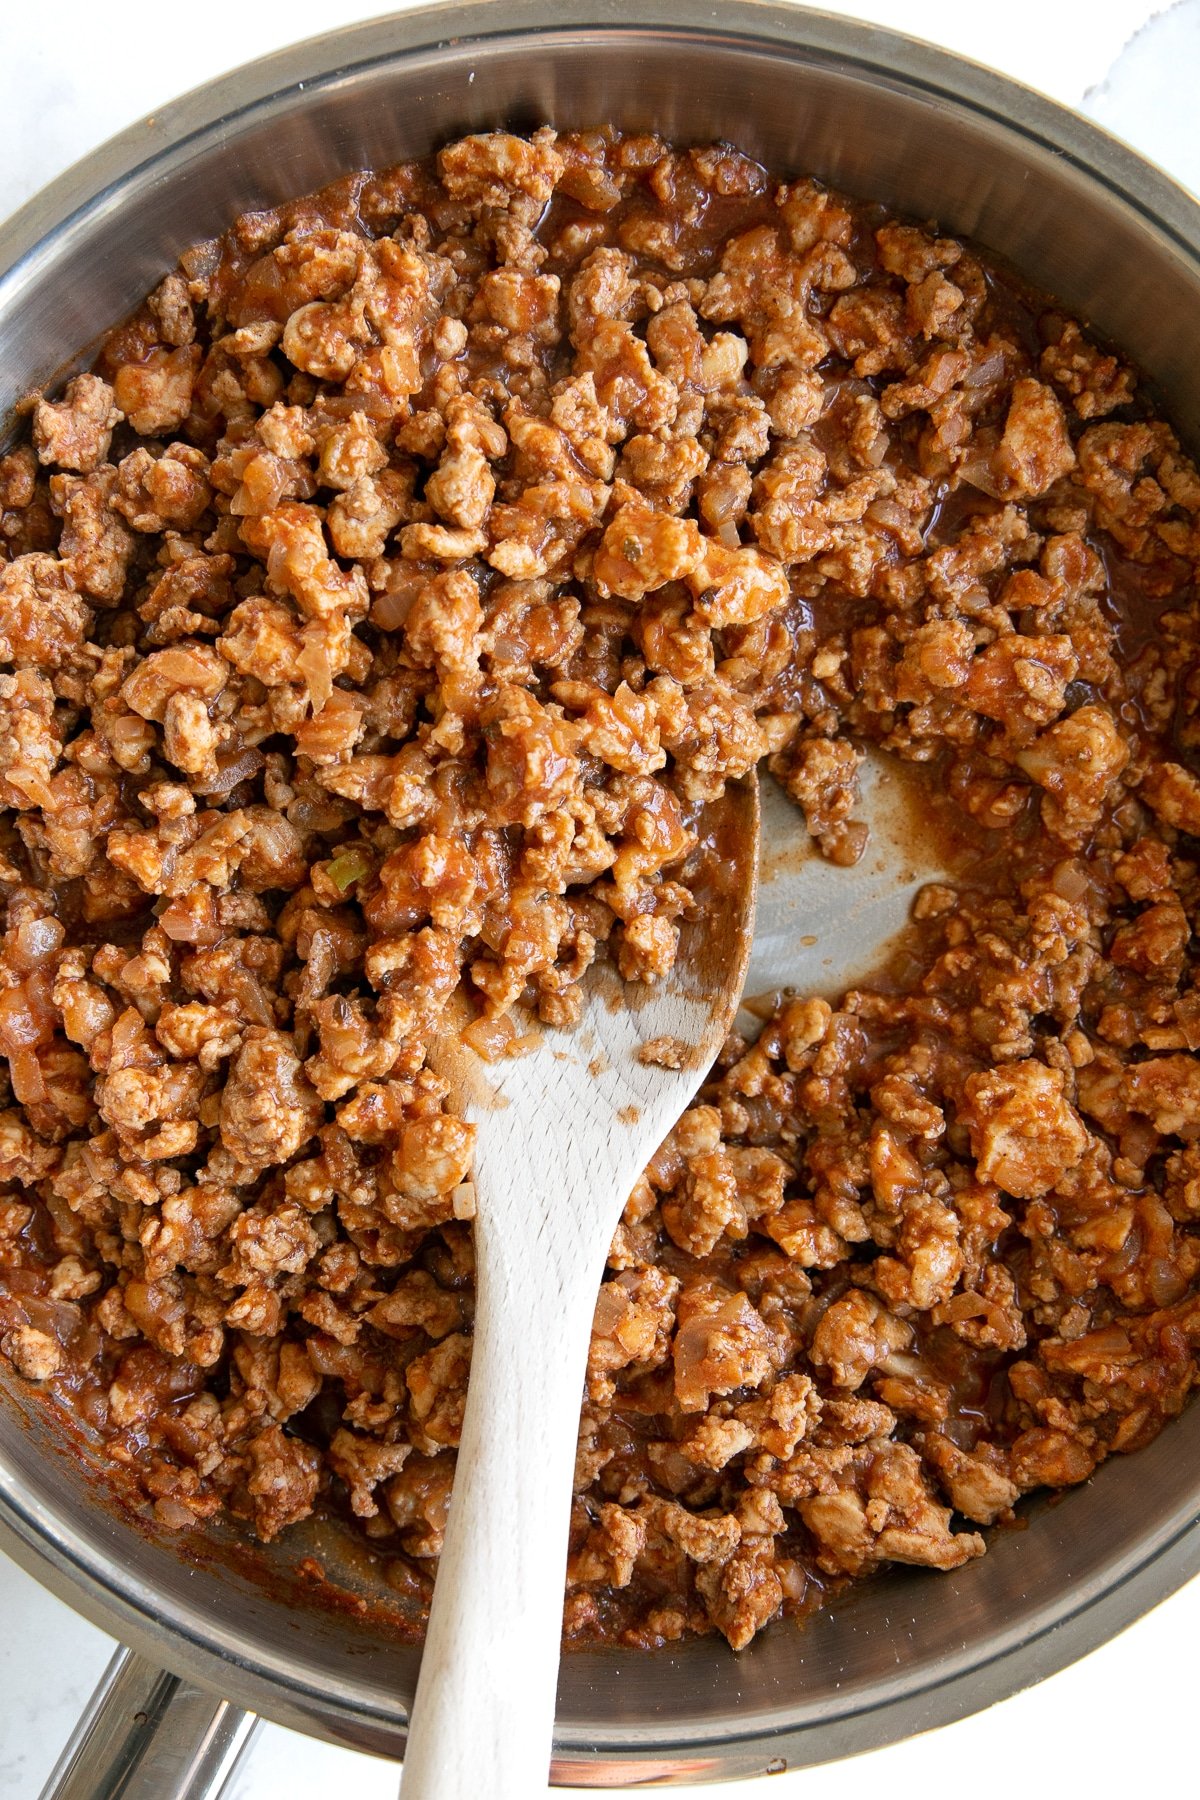 Overhead image of a saucepan filled with ground turkey taco meat.